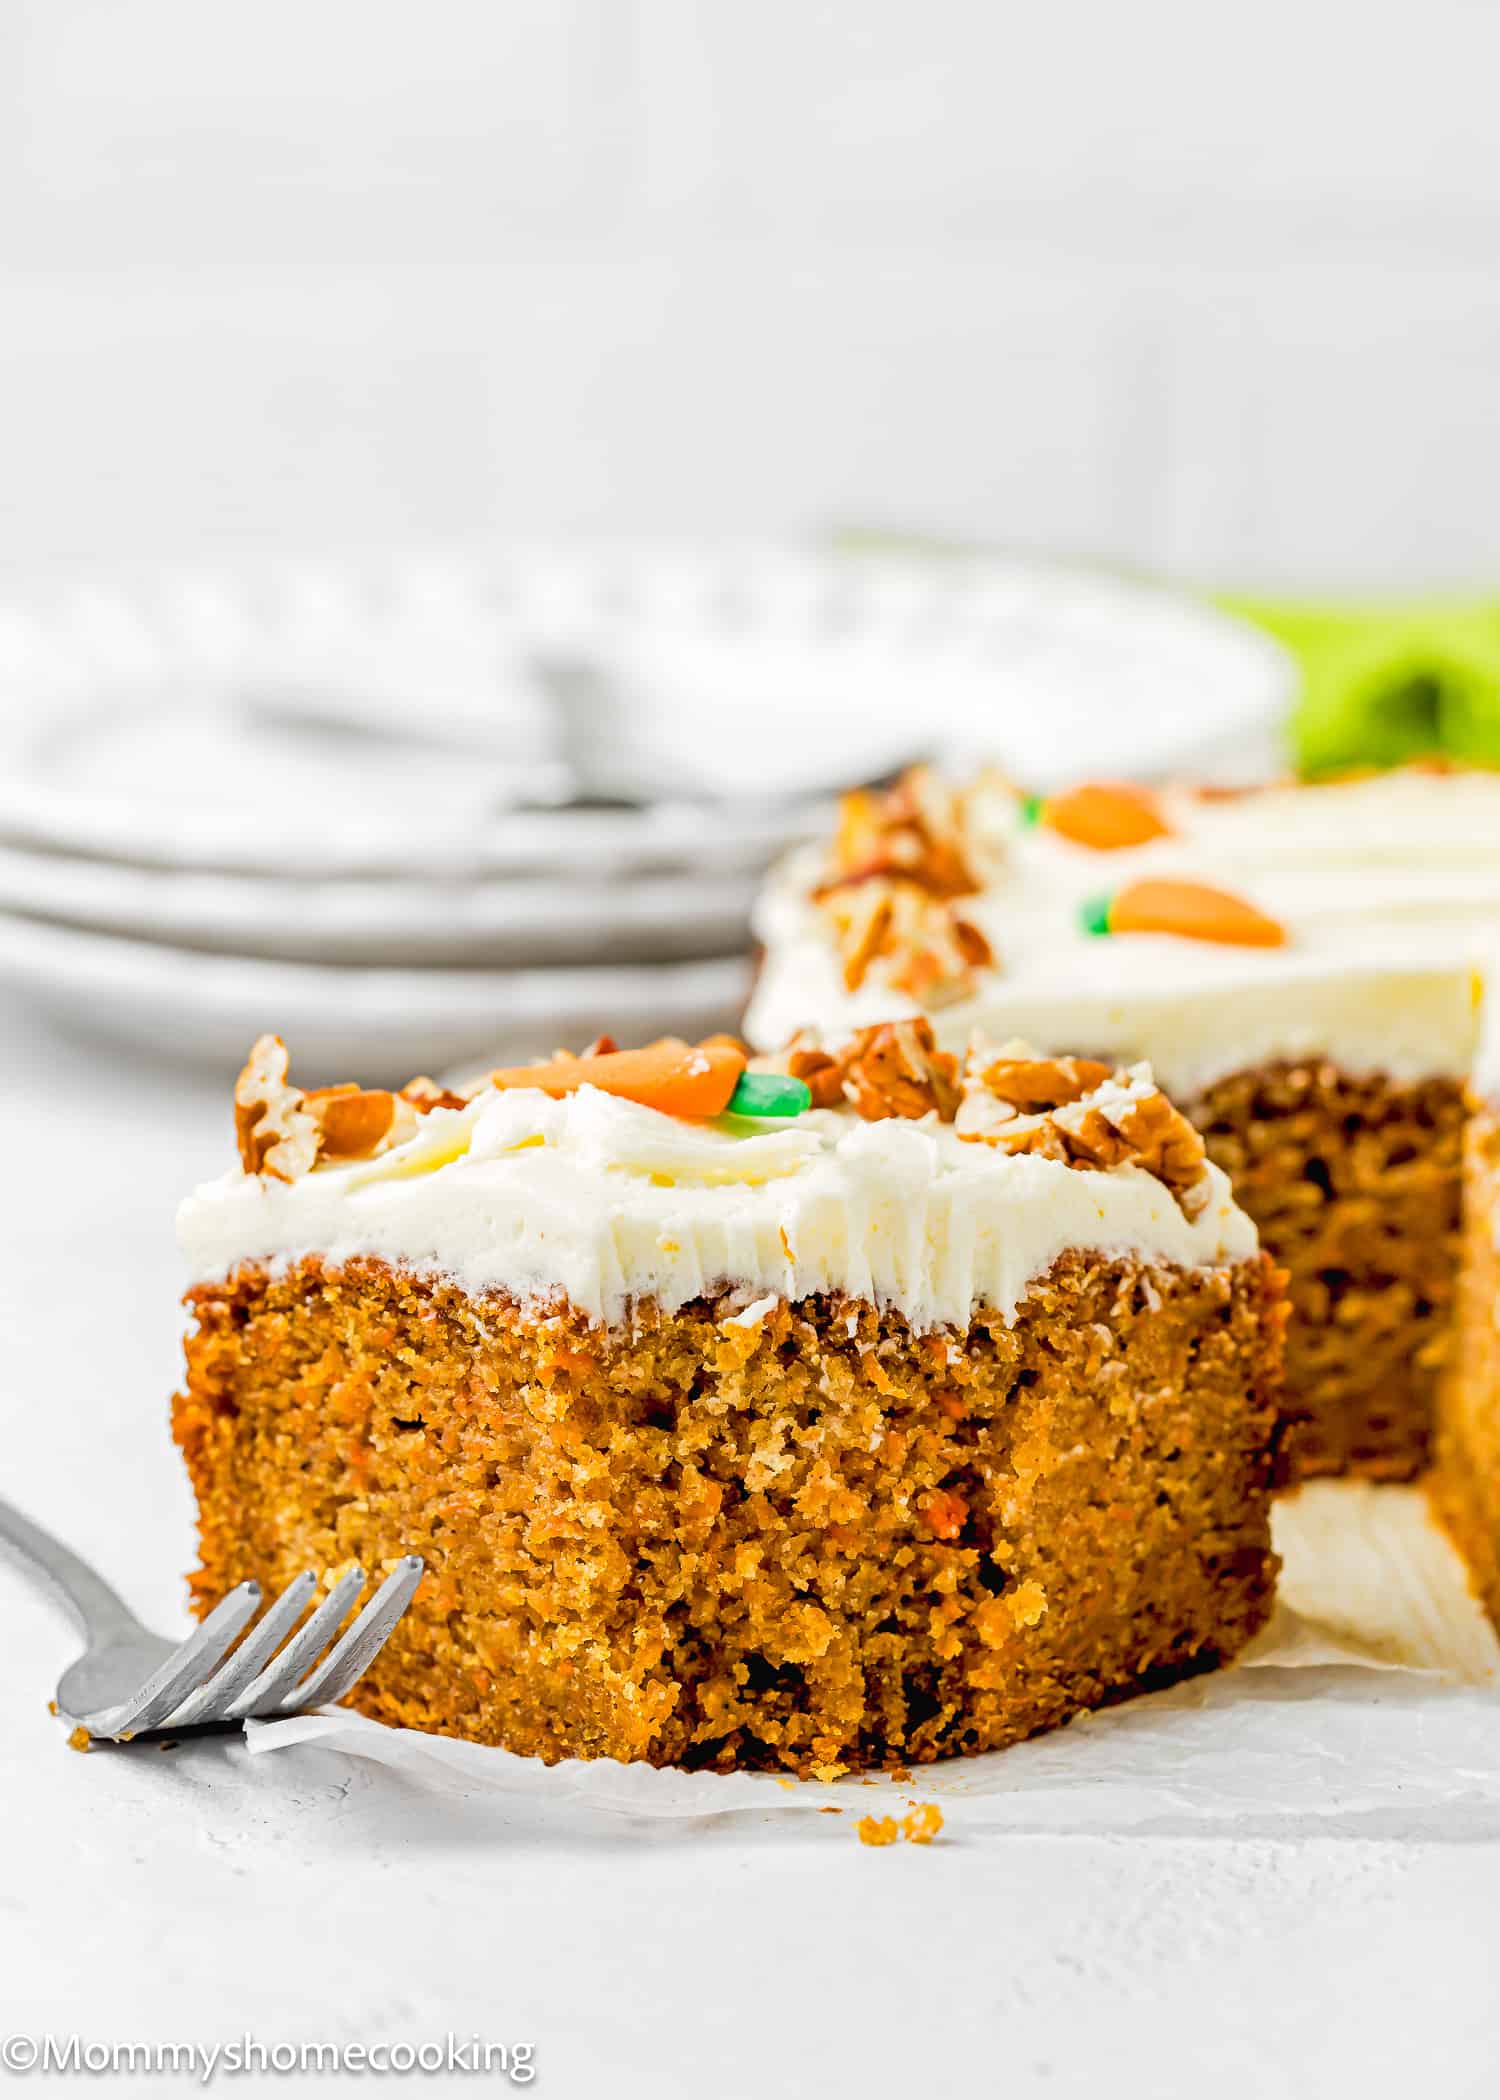 a bitten slice of Easy Carrot Cake Snack Cake (No Eggs – No Dairy) showing its moist and tender texture with plates and forks in the background.